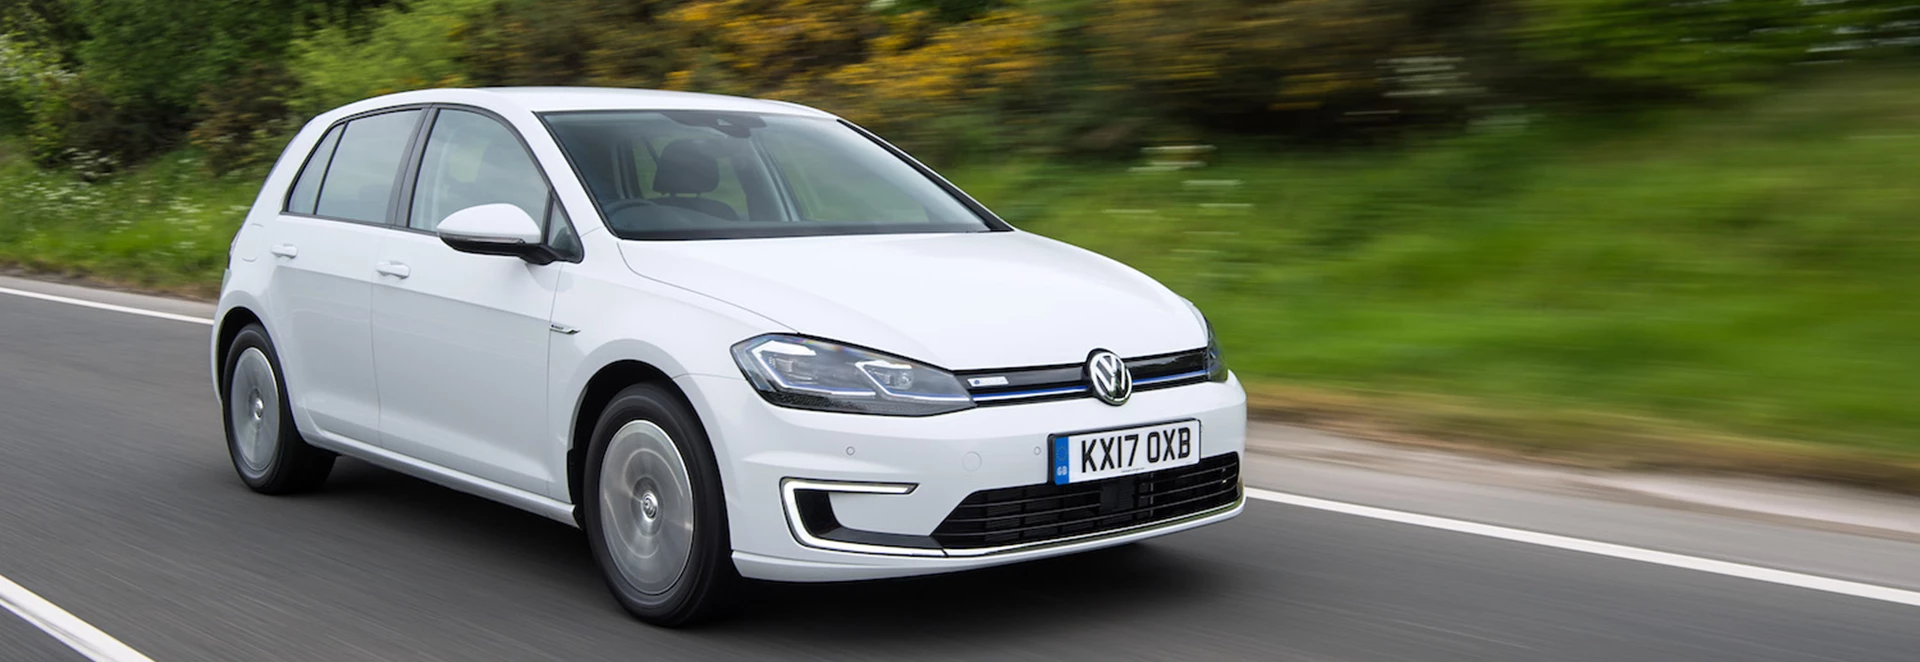 2019 Volkswagen e-Golf: What you need to know